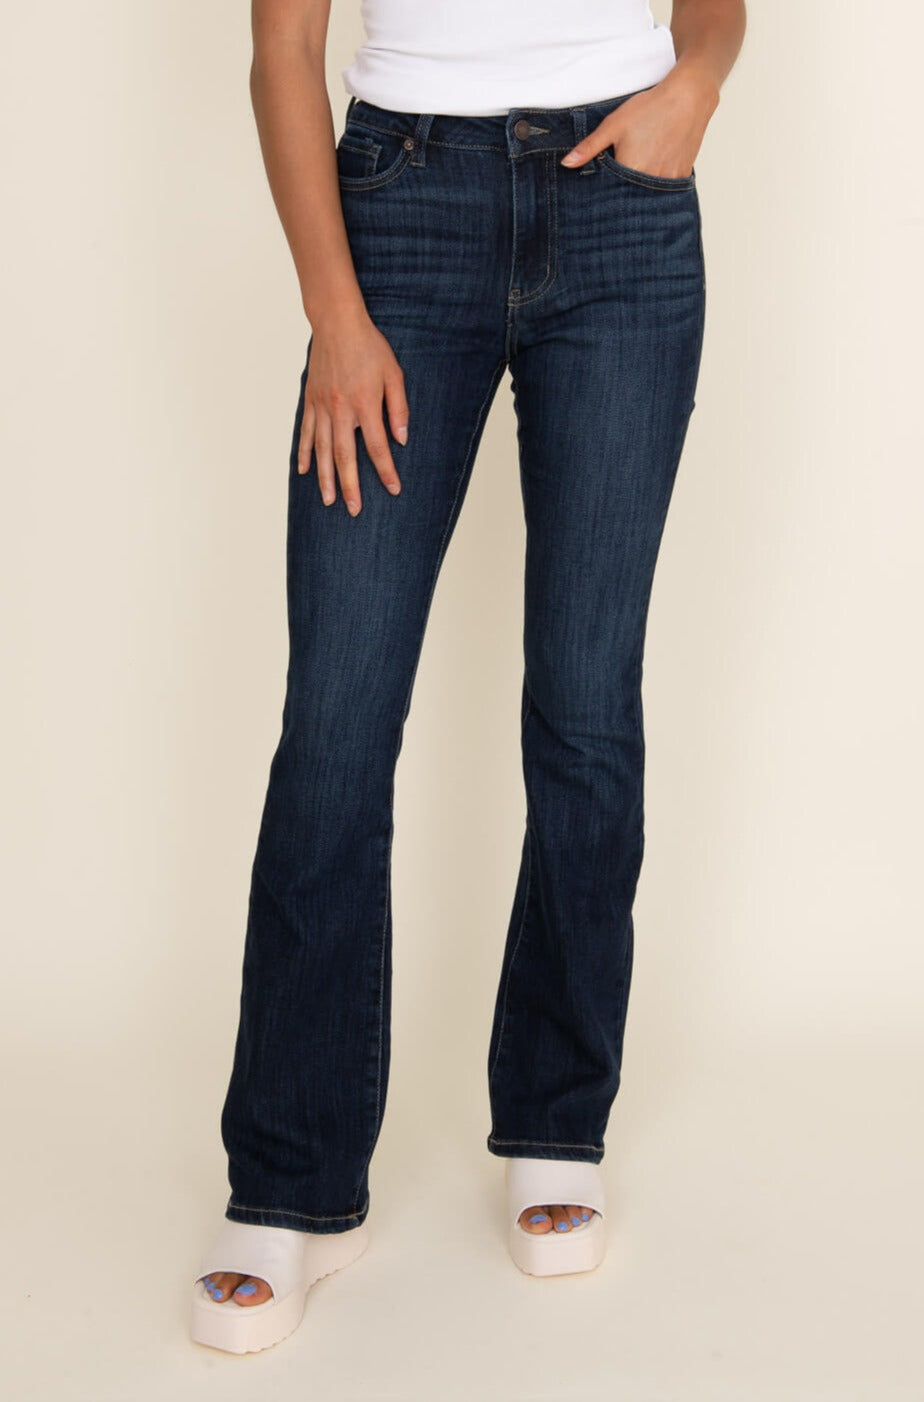 Women's Bootcut & Flared Jeans - Ankle & Slim Fit